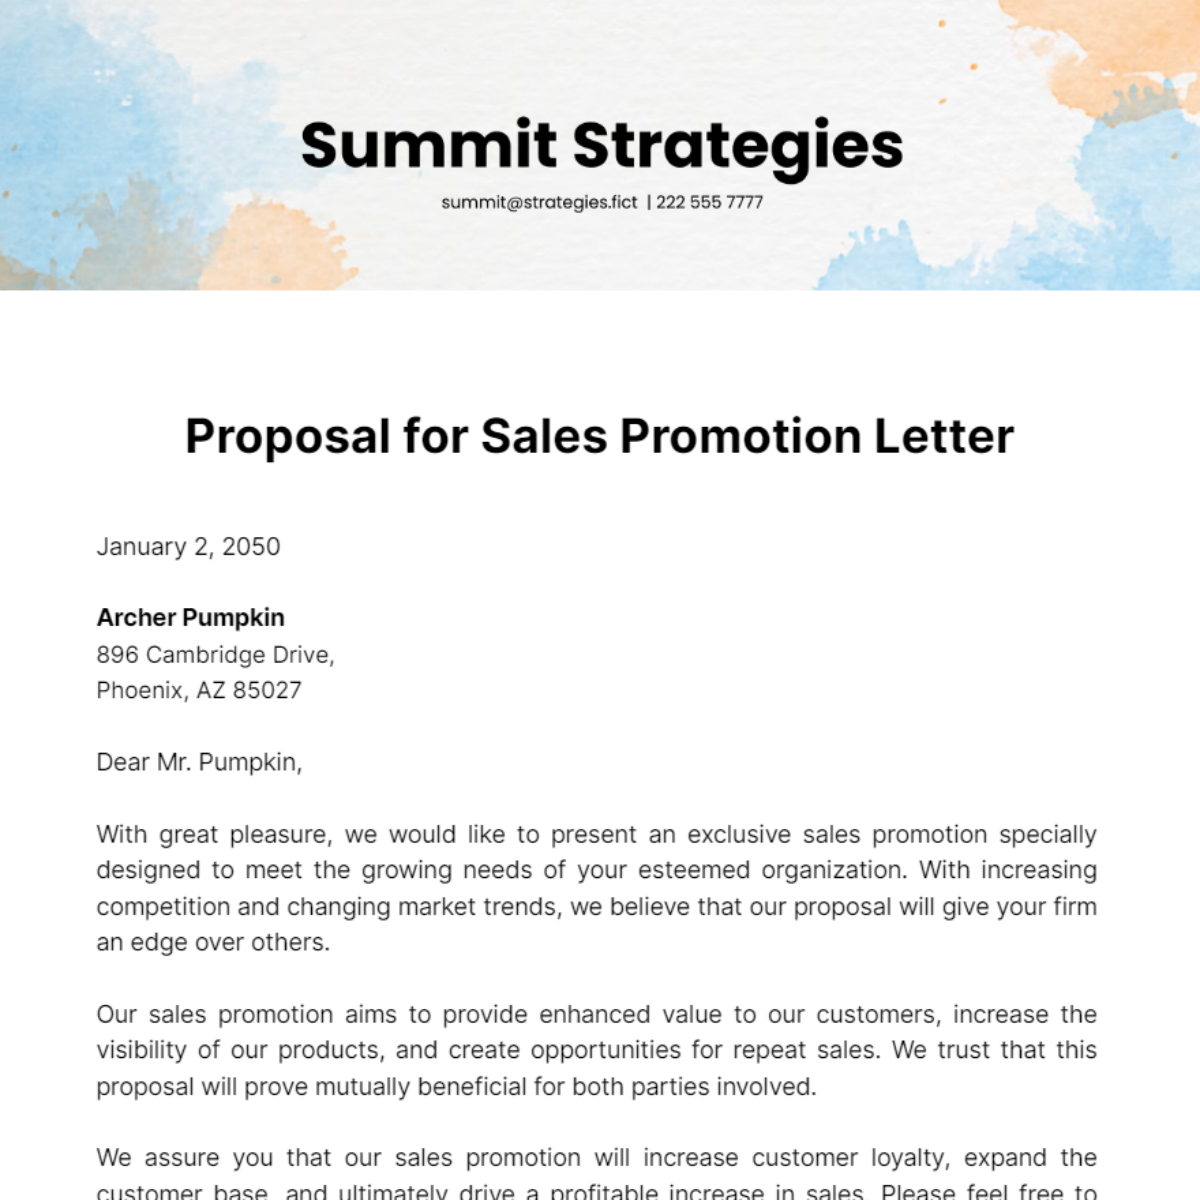 Proposal for Sales Promotion Letter Template